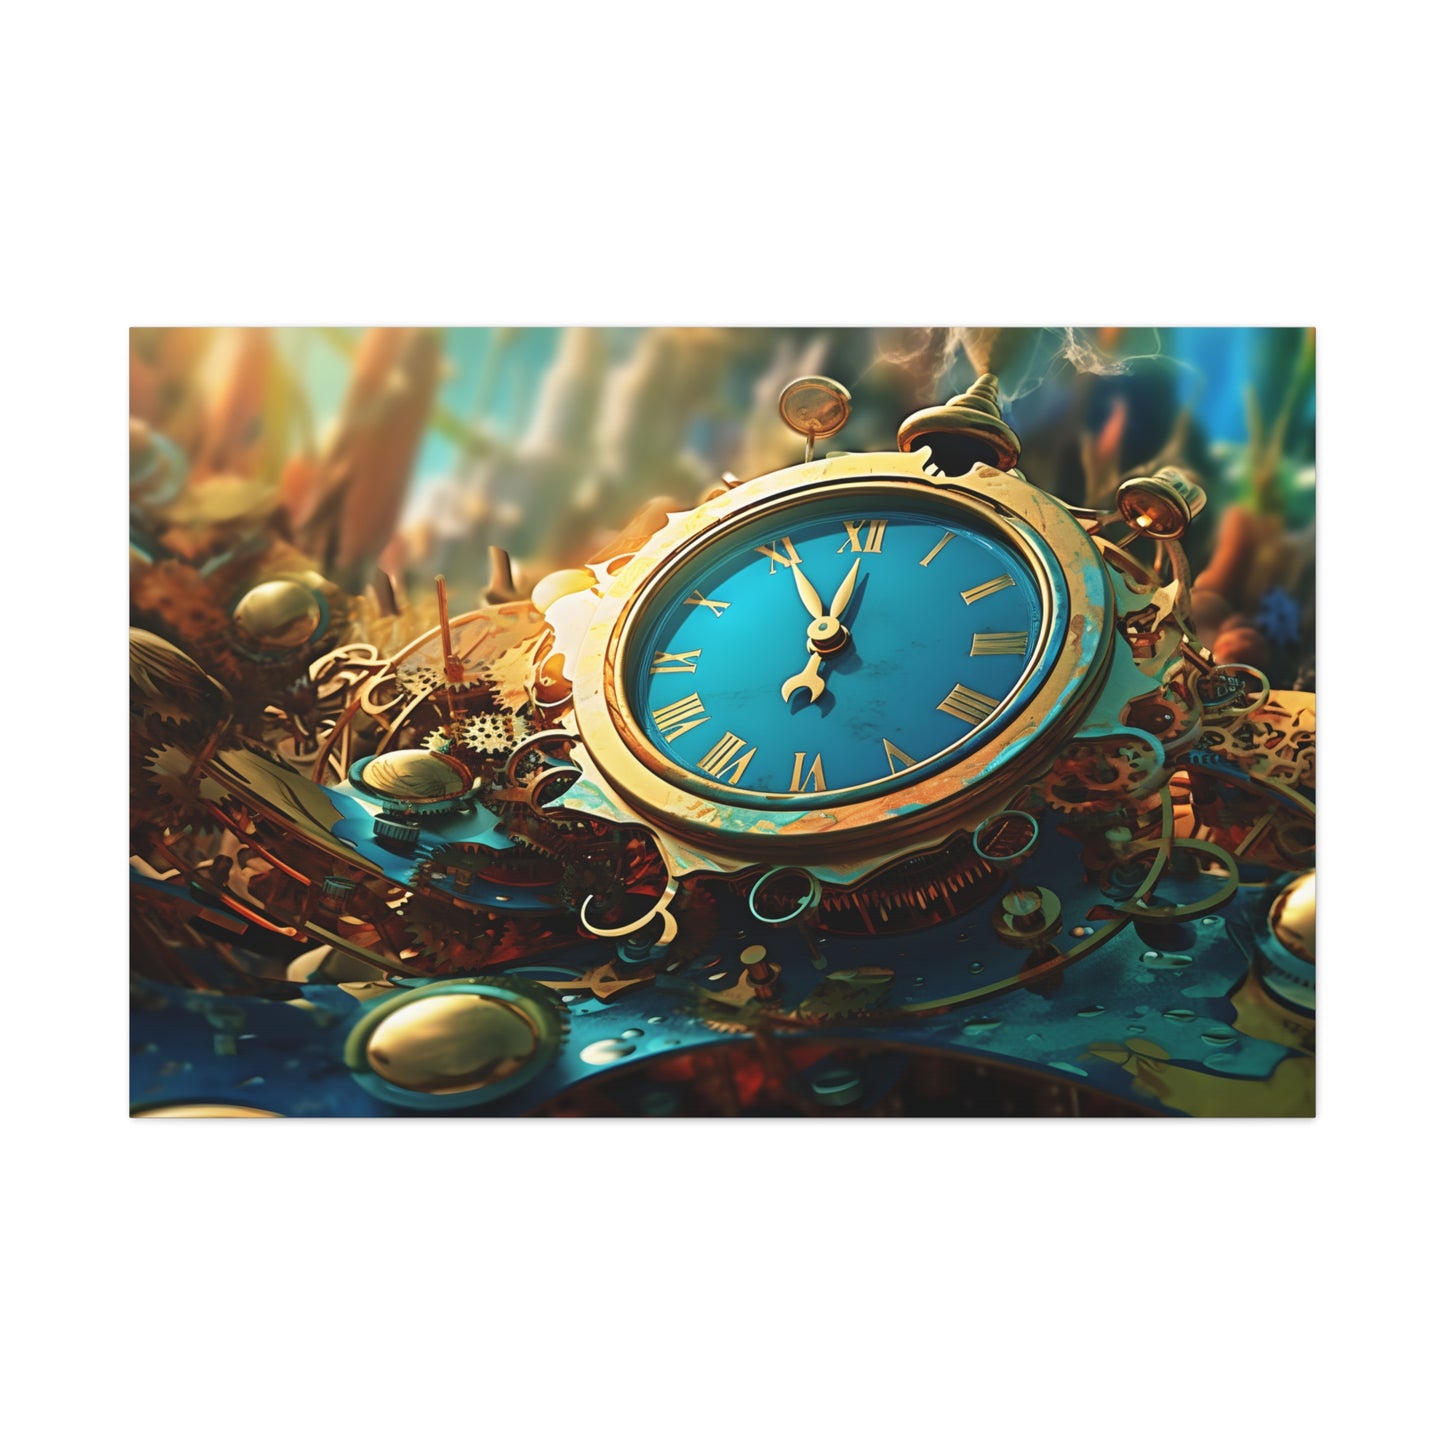 Whimsical Time Piece